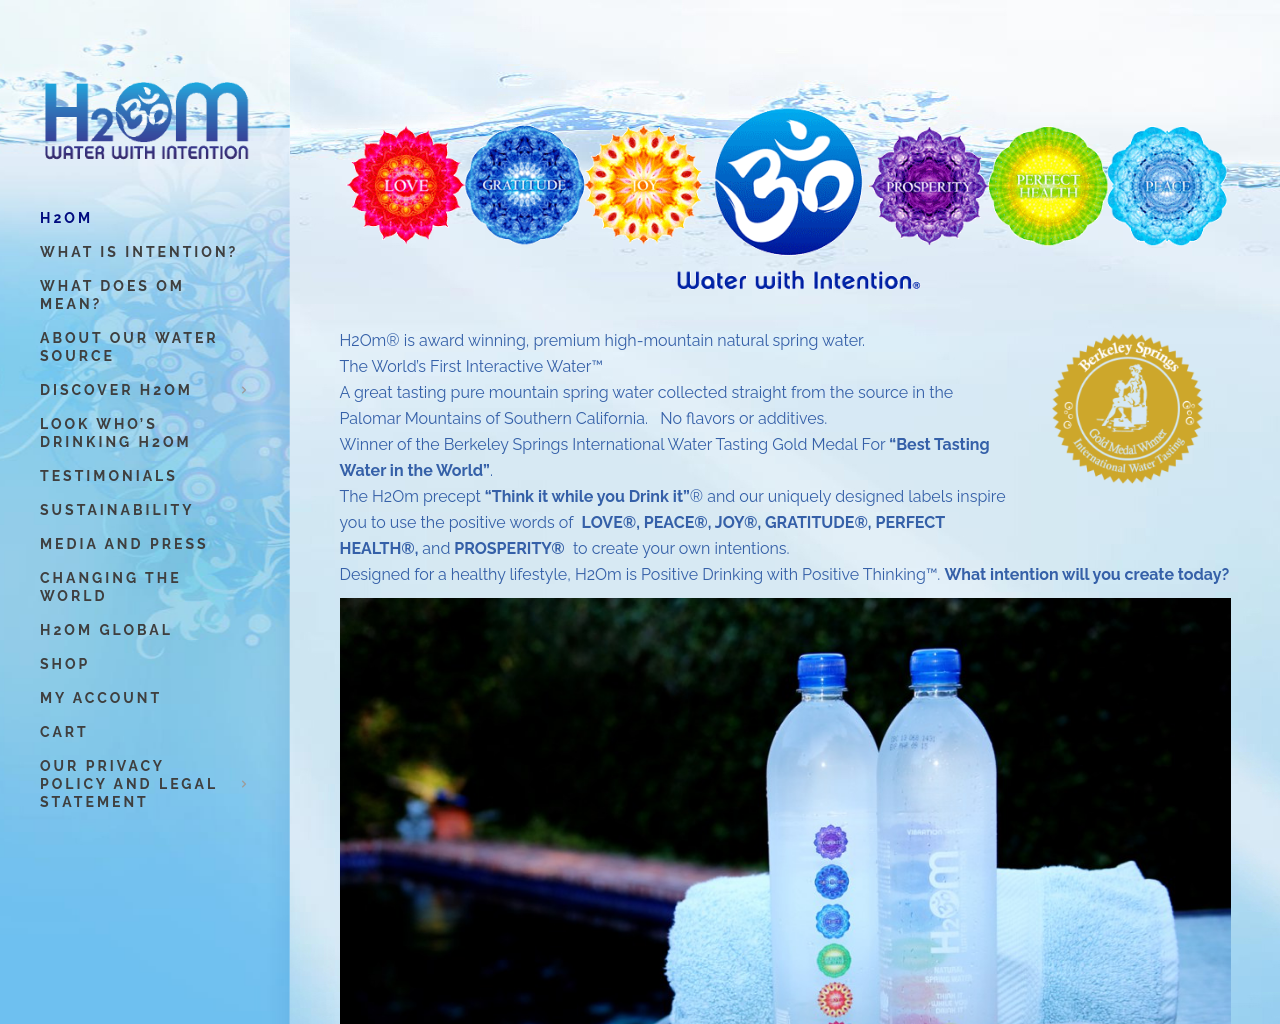 h2omwater.com